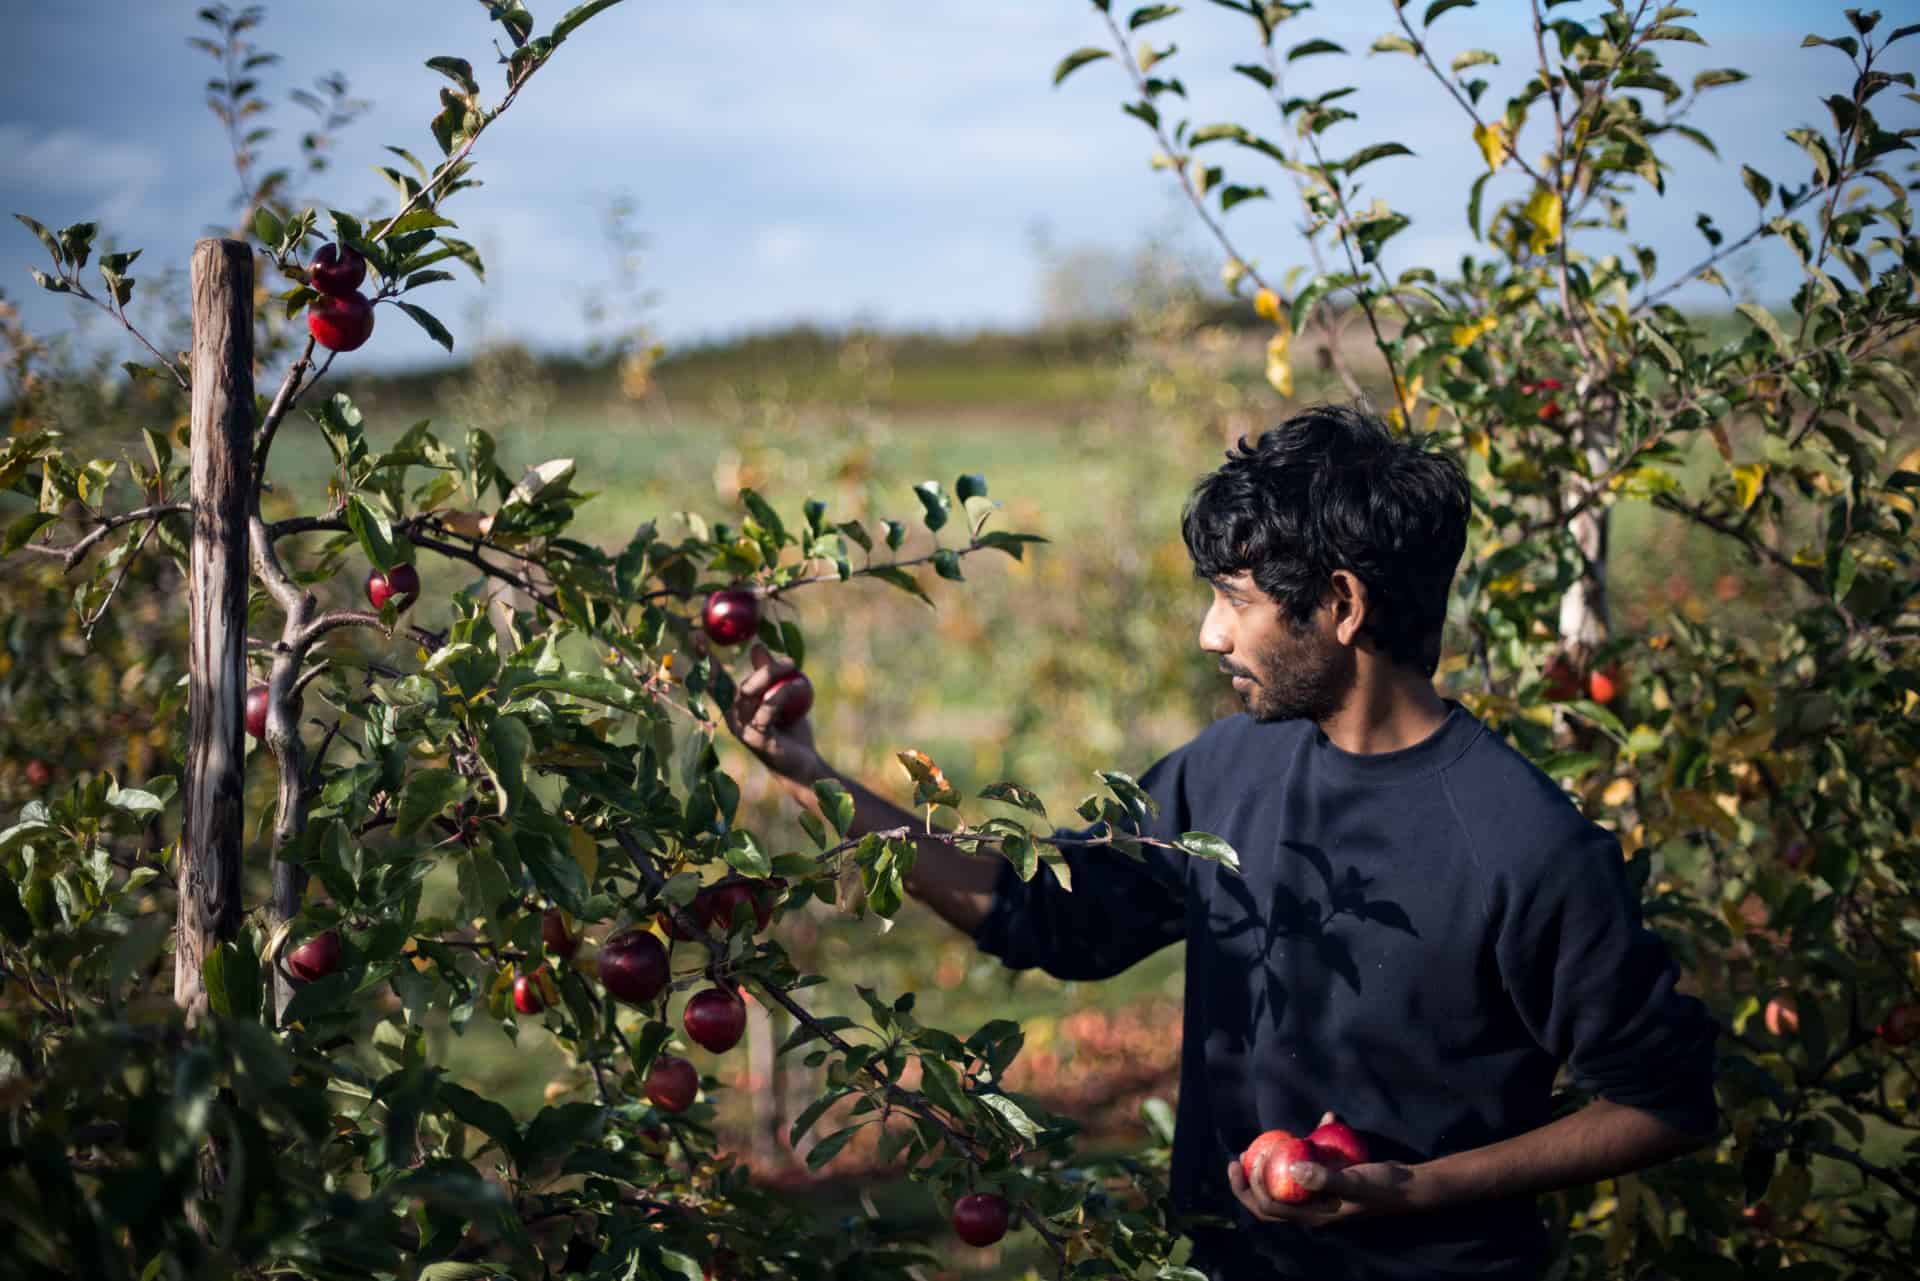 Gleaning to reduce food waste - Documentary Photography by Chris King for Open Eye Media